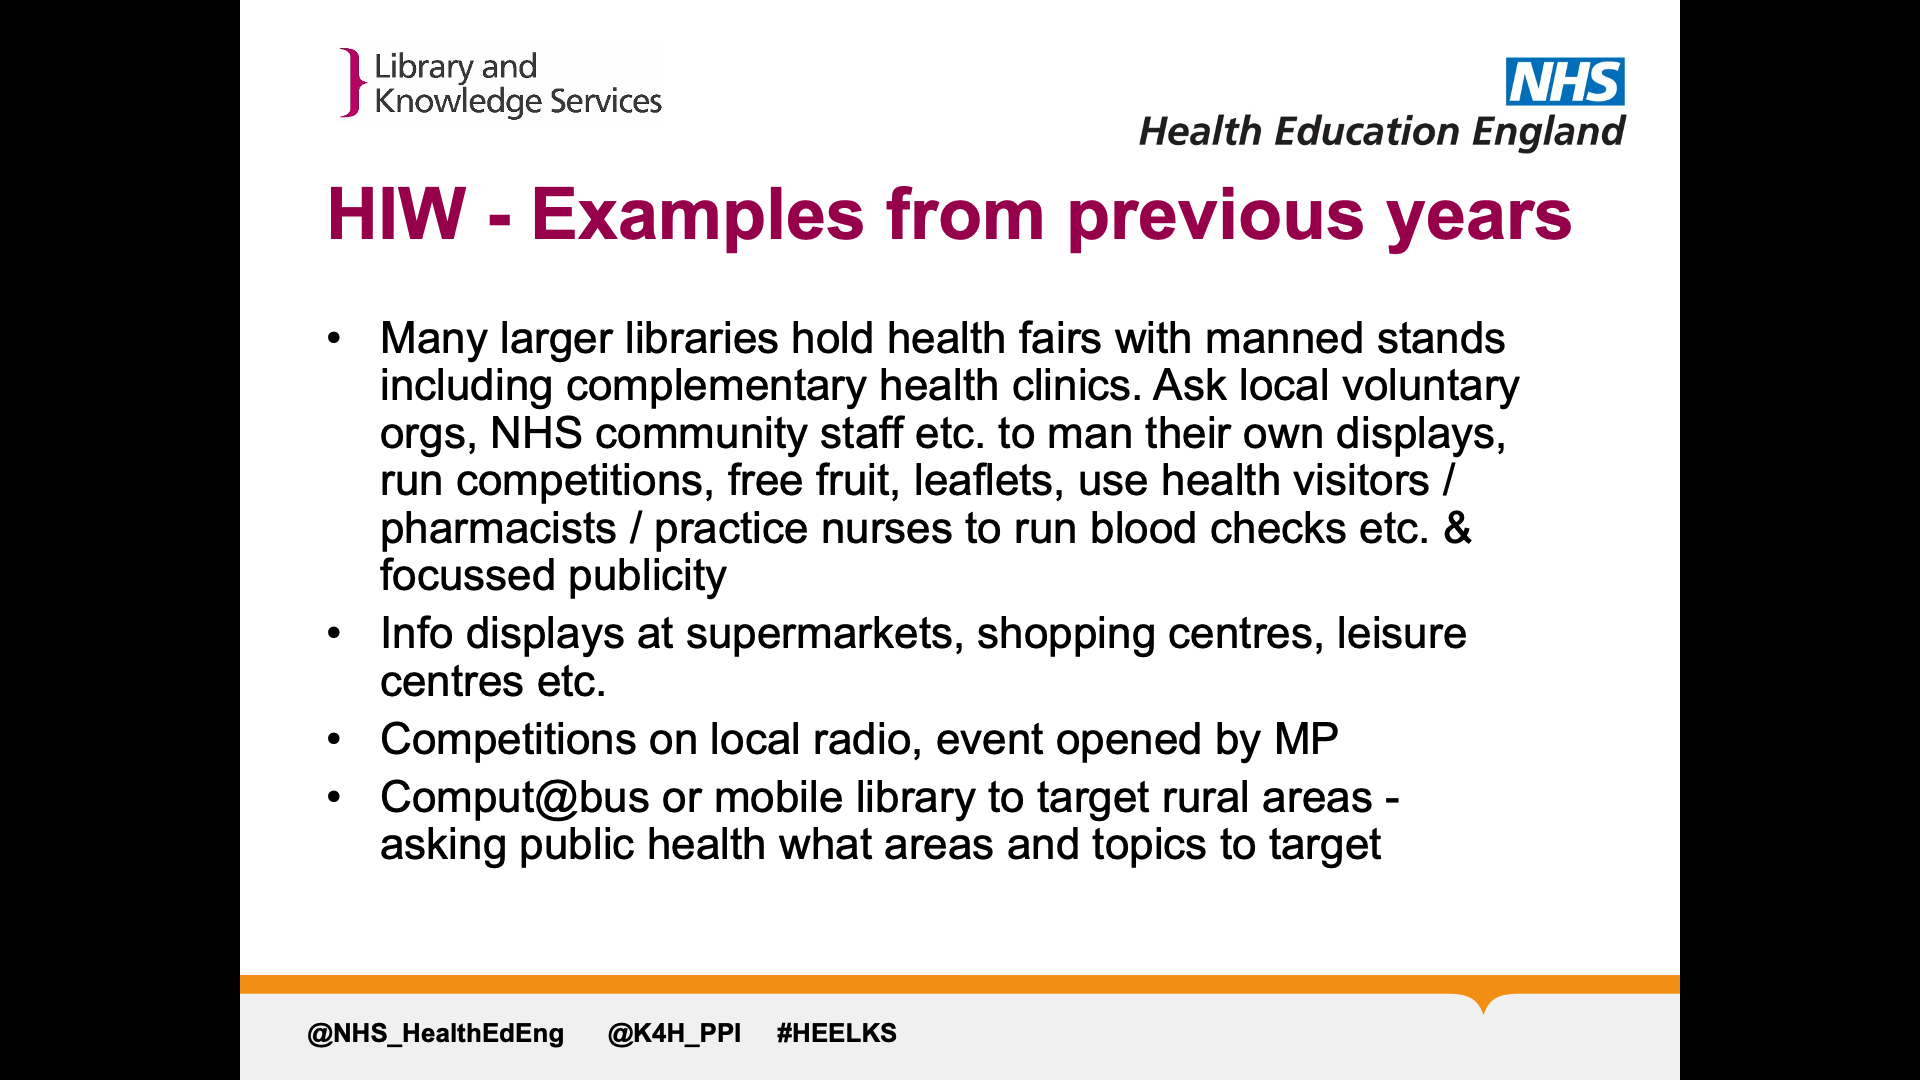 Title: HIW - Examples from previous years. Text on page: Many larger libraries hold health fairs with manned stands including complementary health clinics. Ask local voluntary orgs, NHS community staff etc. to man their own displays, run competitions, free fruit, leaflets, use health visitors / pharmacists / practice nurses to run blood checks etc. & focussed publicity Info displays at supermarkets, shopping centres, leisure centres etc.  Competitions on local radio, event opened by MP  Comput@bus or mobile library to target rural areas - asking public health what areas and topics to target